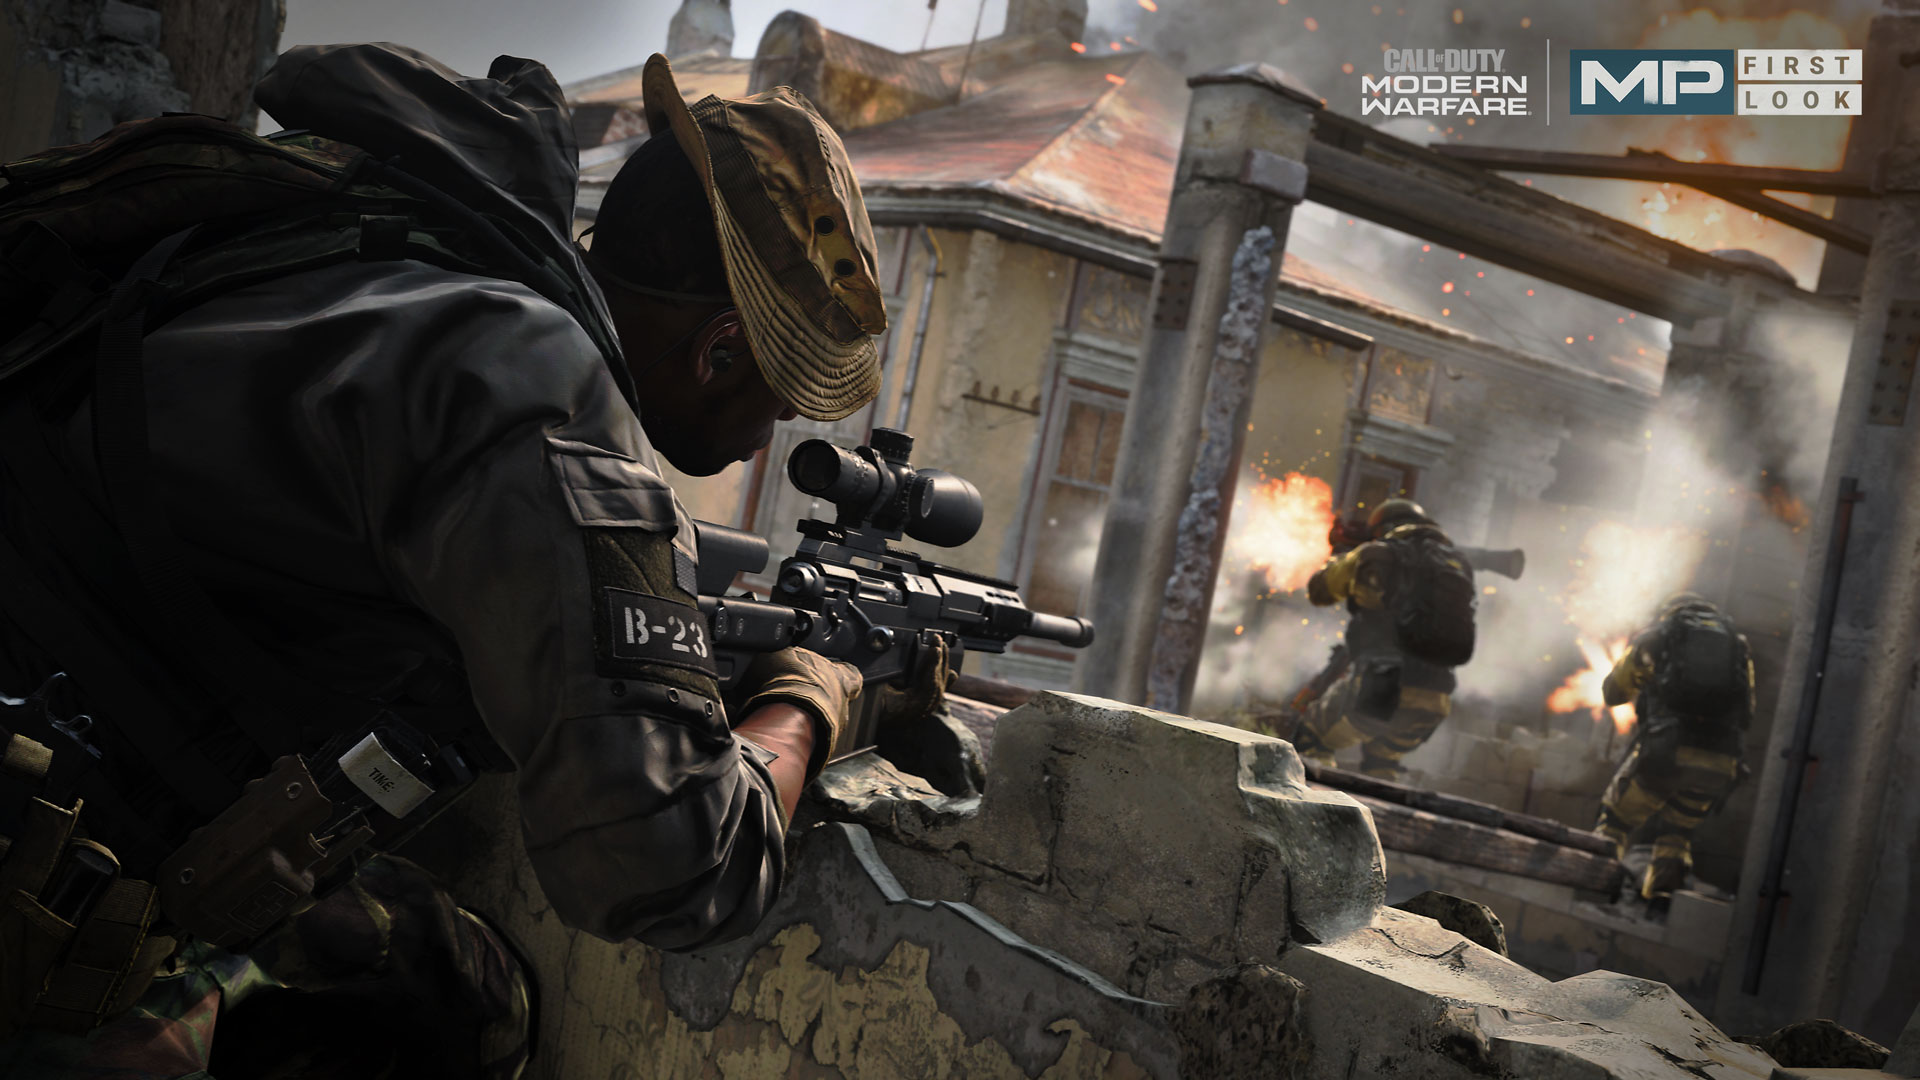 Here's a First Look at Call of Duty MW2 Gameplay